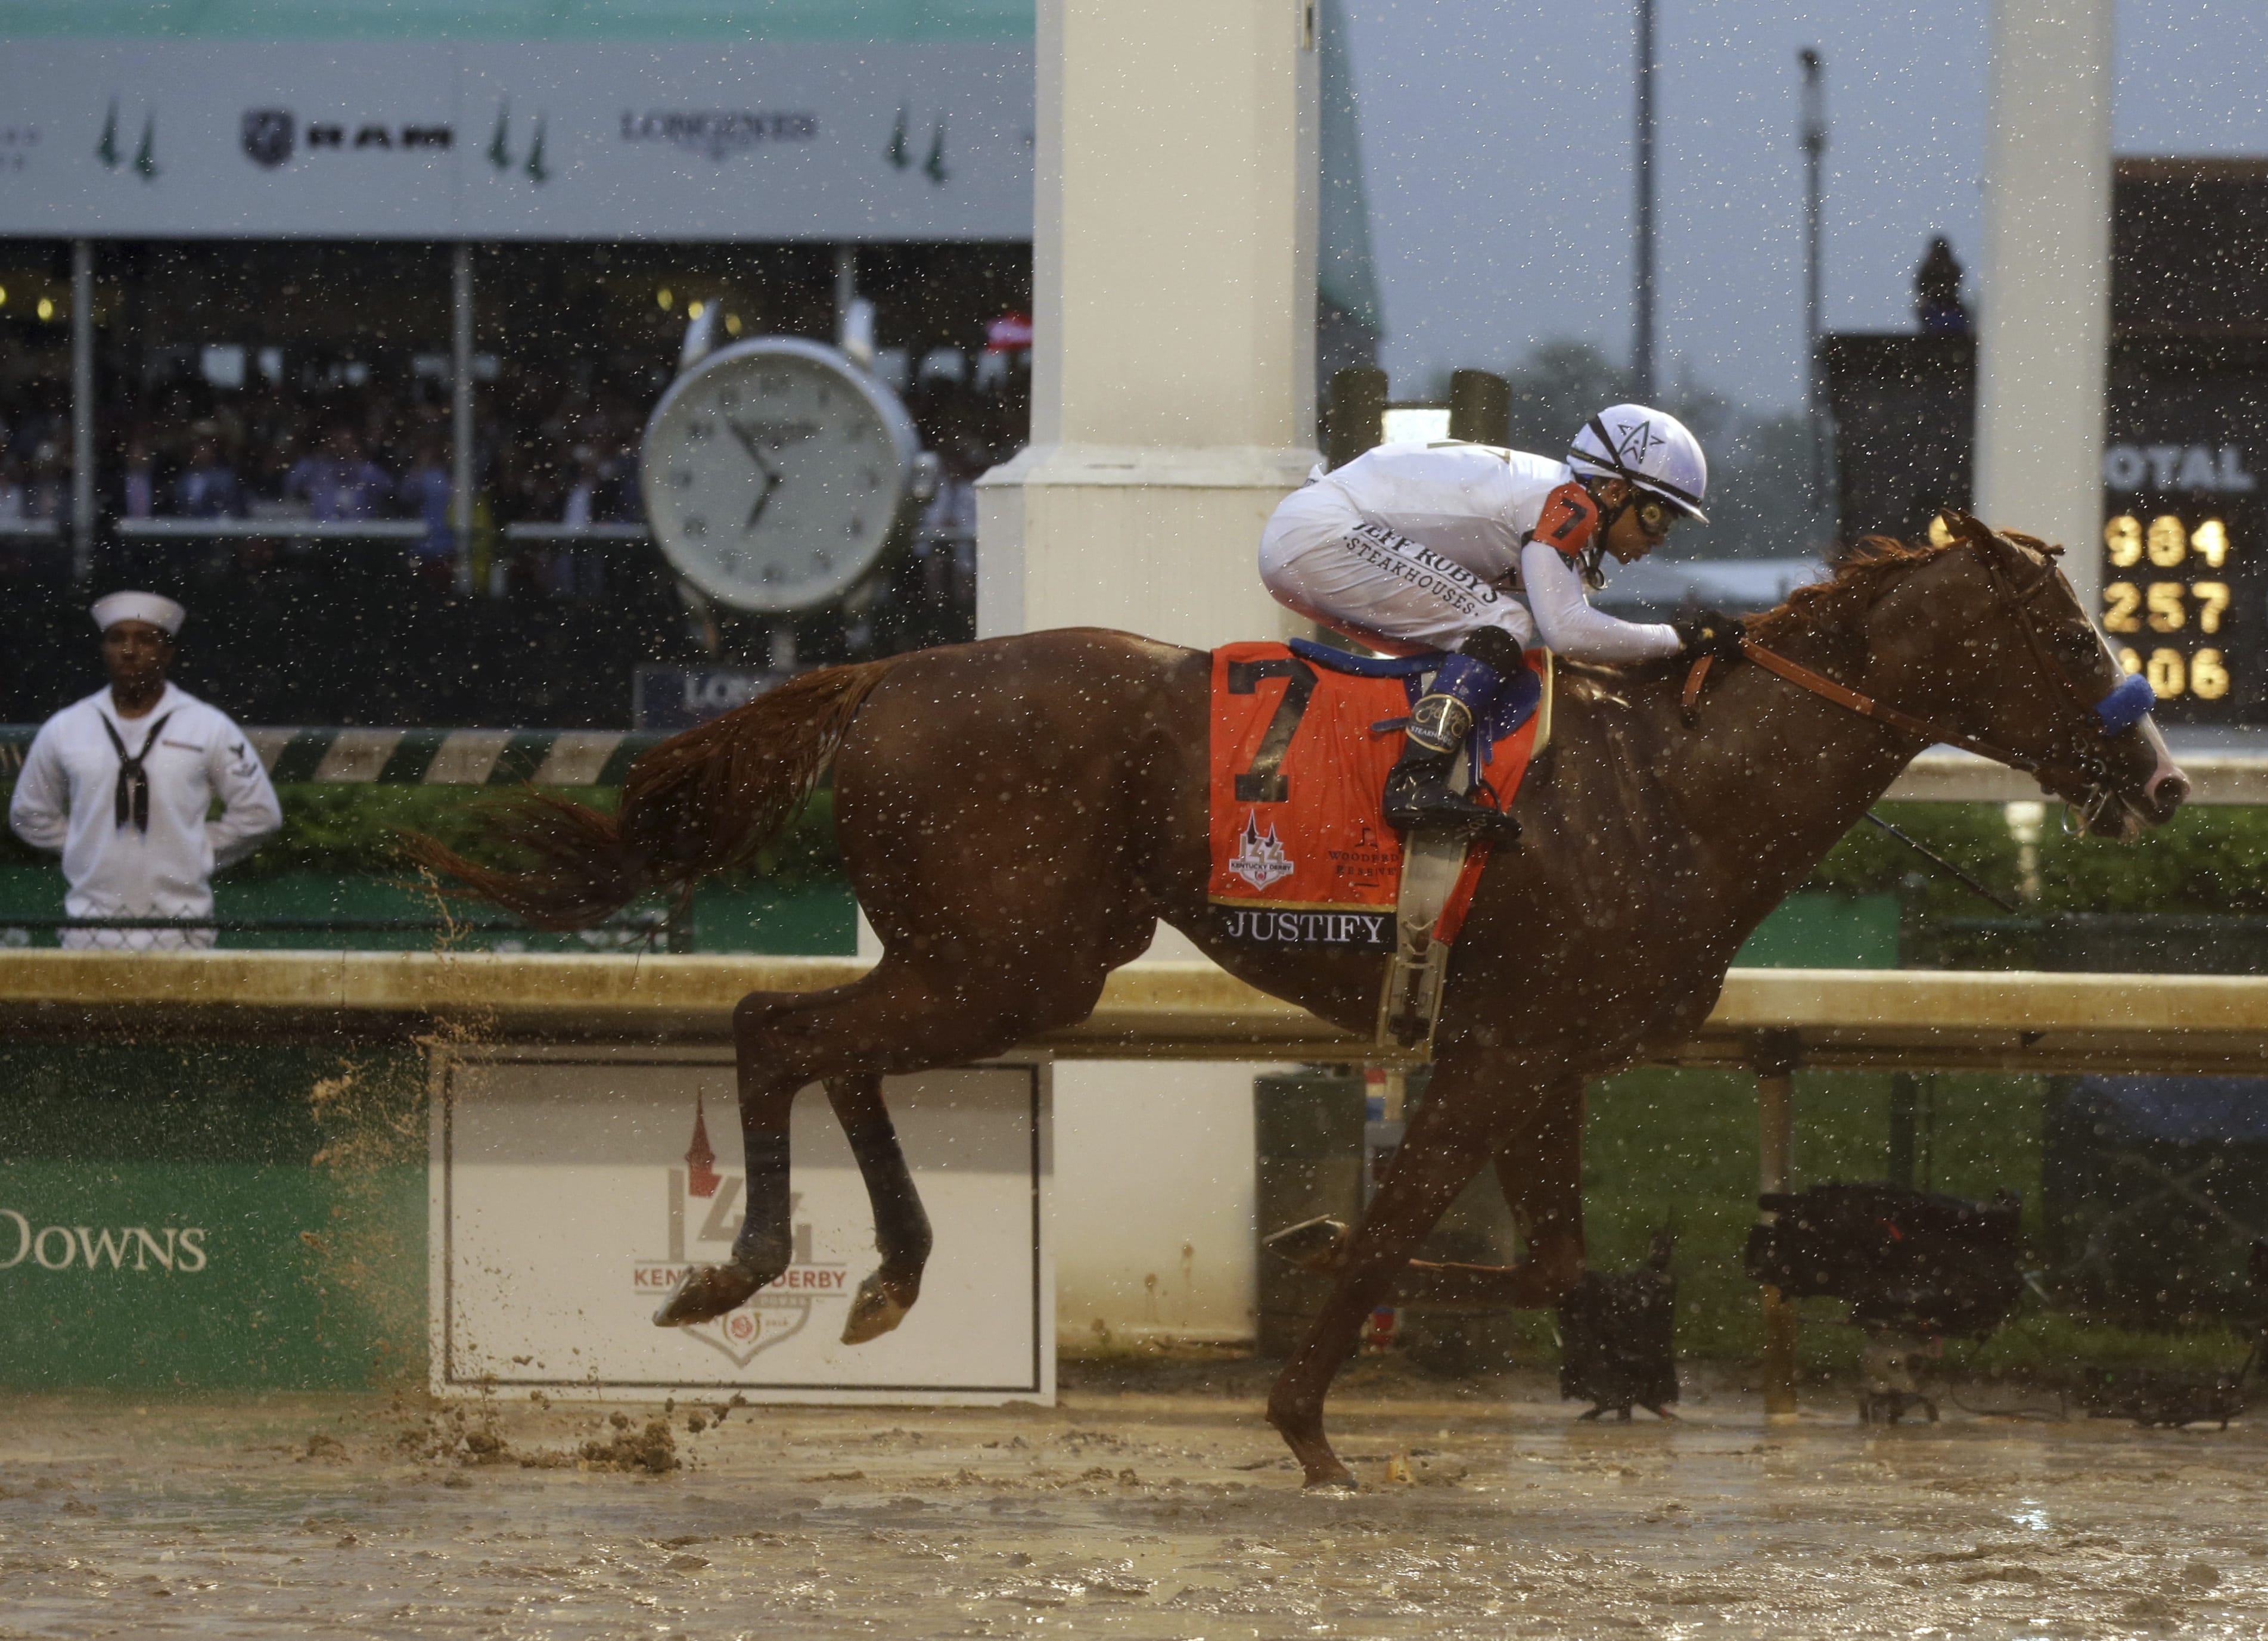 Mike Smith rides Justify to victory during the 144th running of the Kentucky Derby horse race at Churchill Downs Saturday, May 5, 2018, in Louisville, Ky.